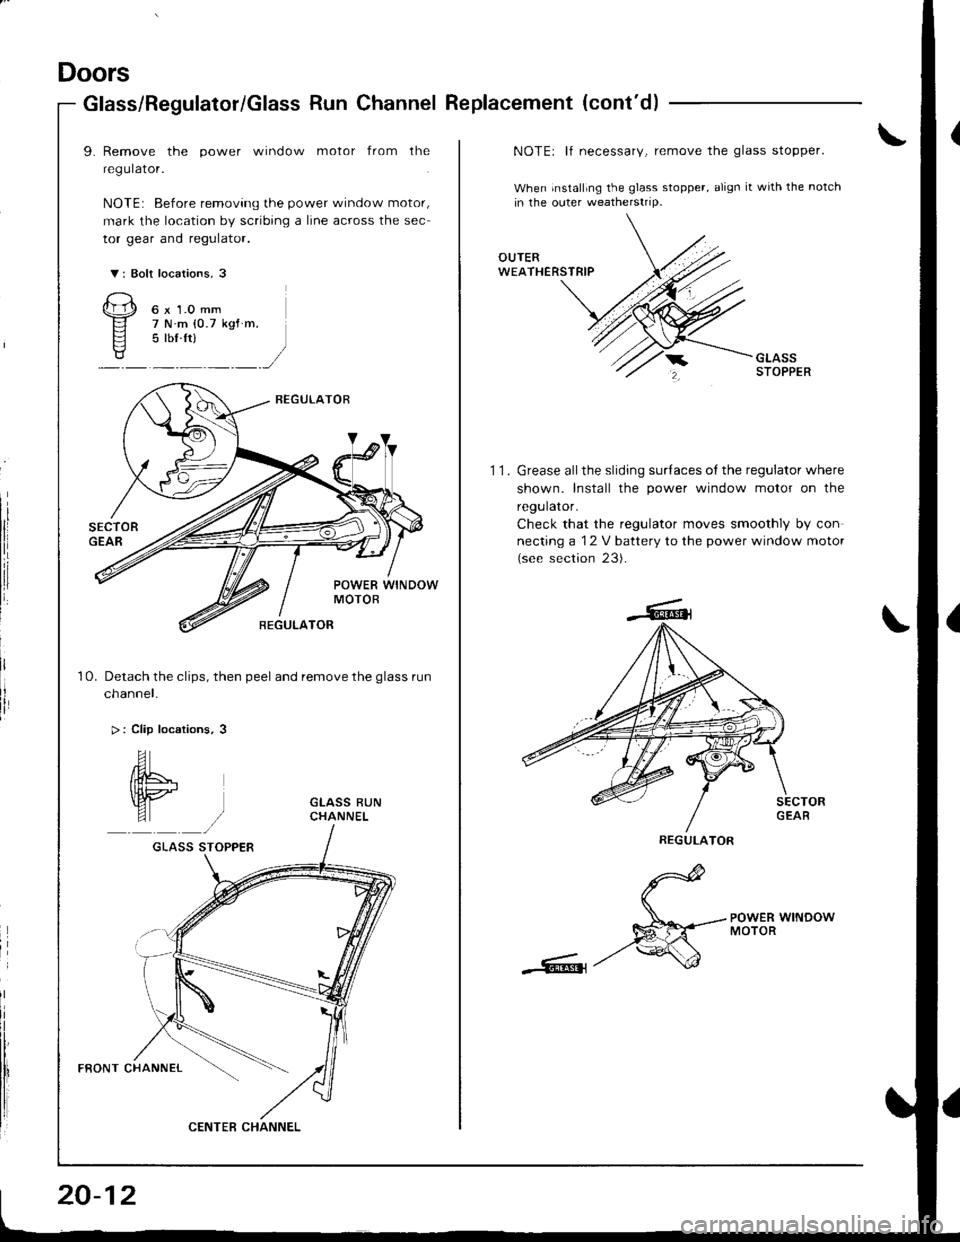 HONDA INTEGRA 1998 4.G Service Manual Doors
Glass/Regulator/Glass Run Channel Replacement (contd)
9. Remove the power window motor from the
regulator.
NOTE: Before removing the power window motor,
mark the location by scribing a line acr